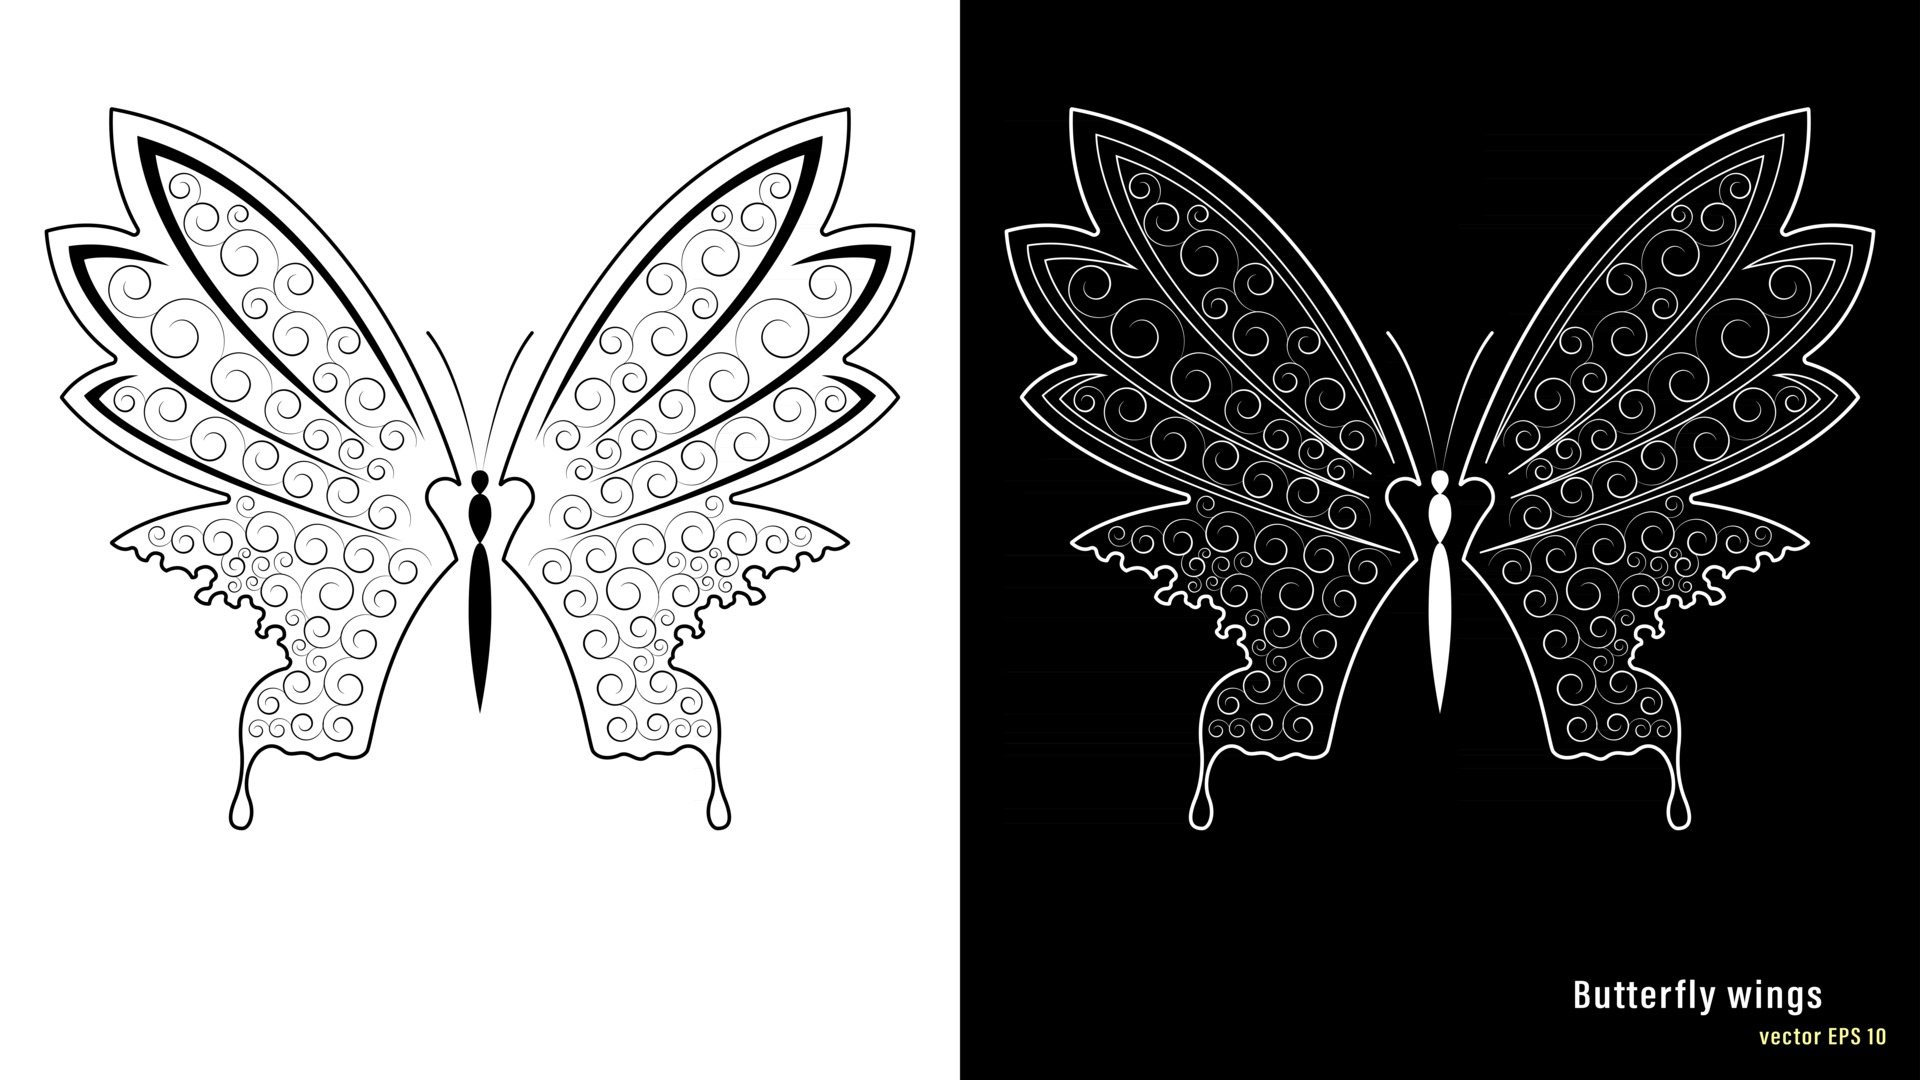 Butterfly wings png images | Klipartz